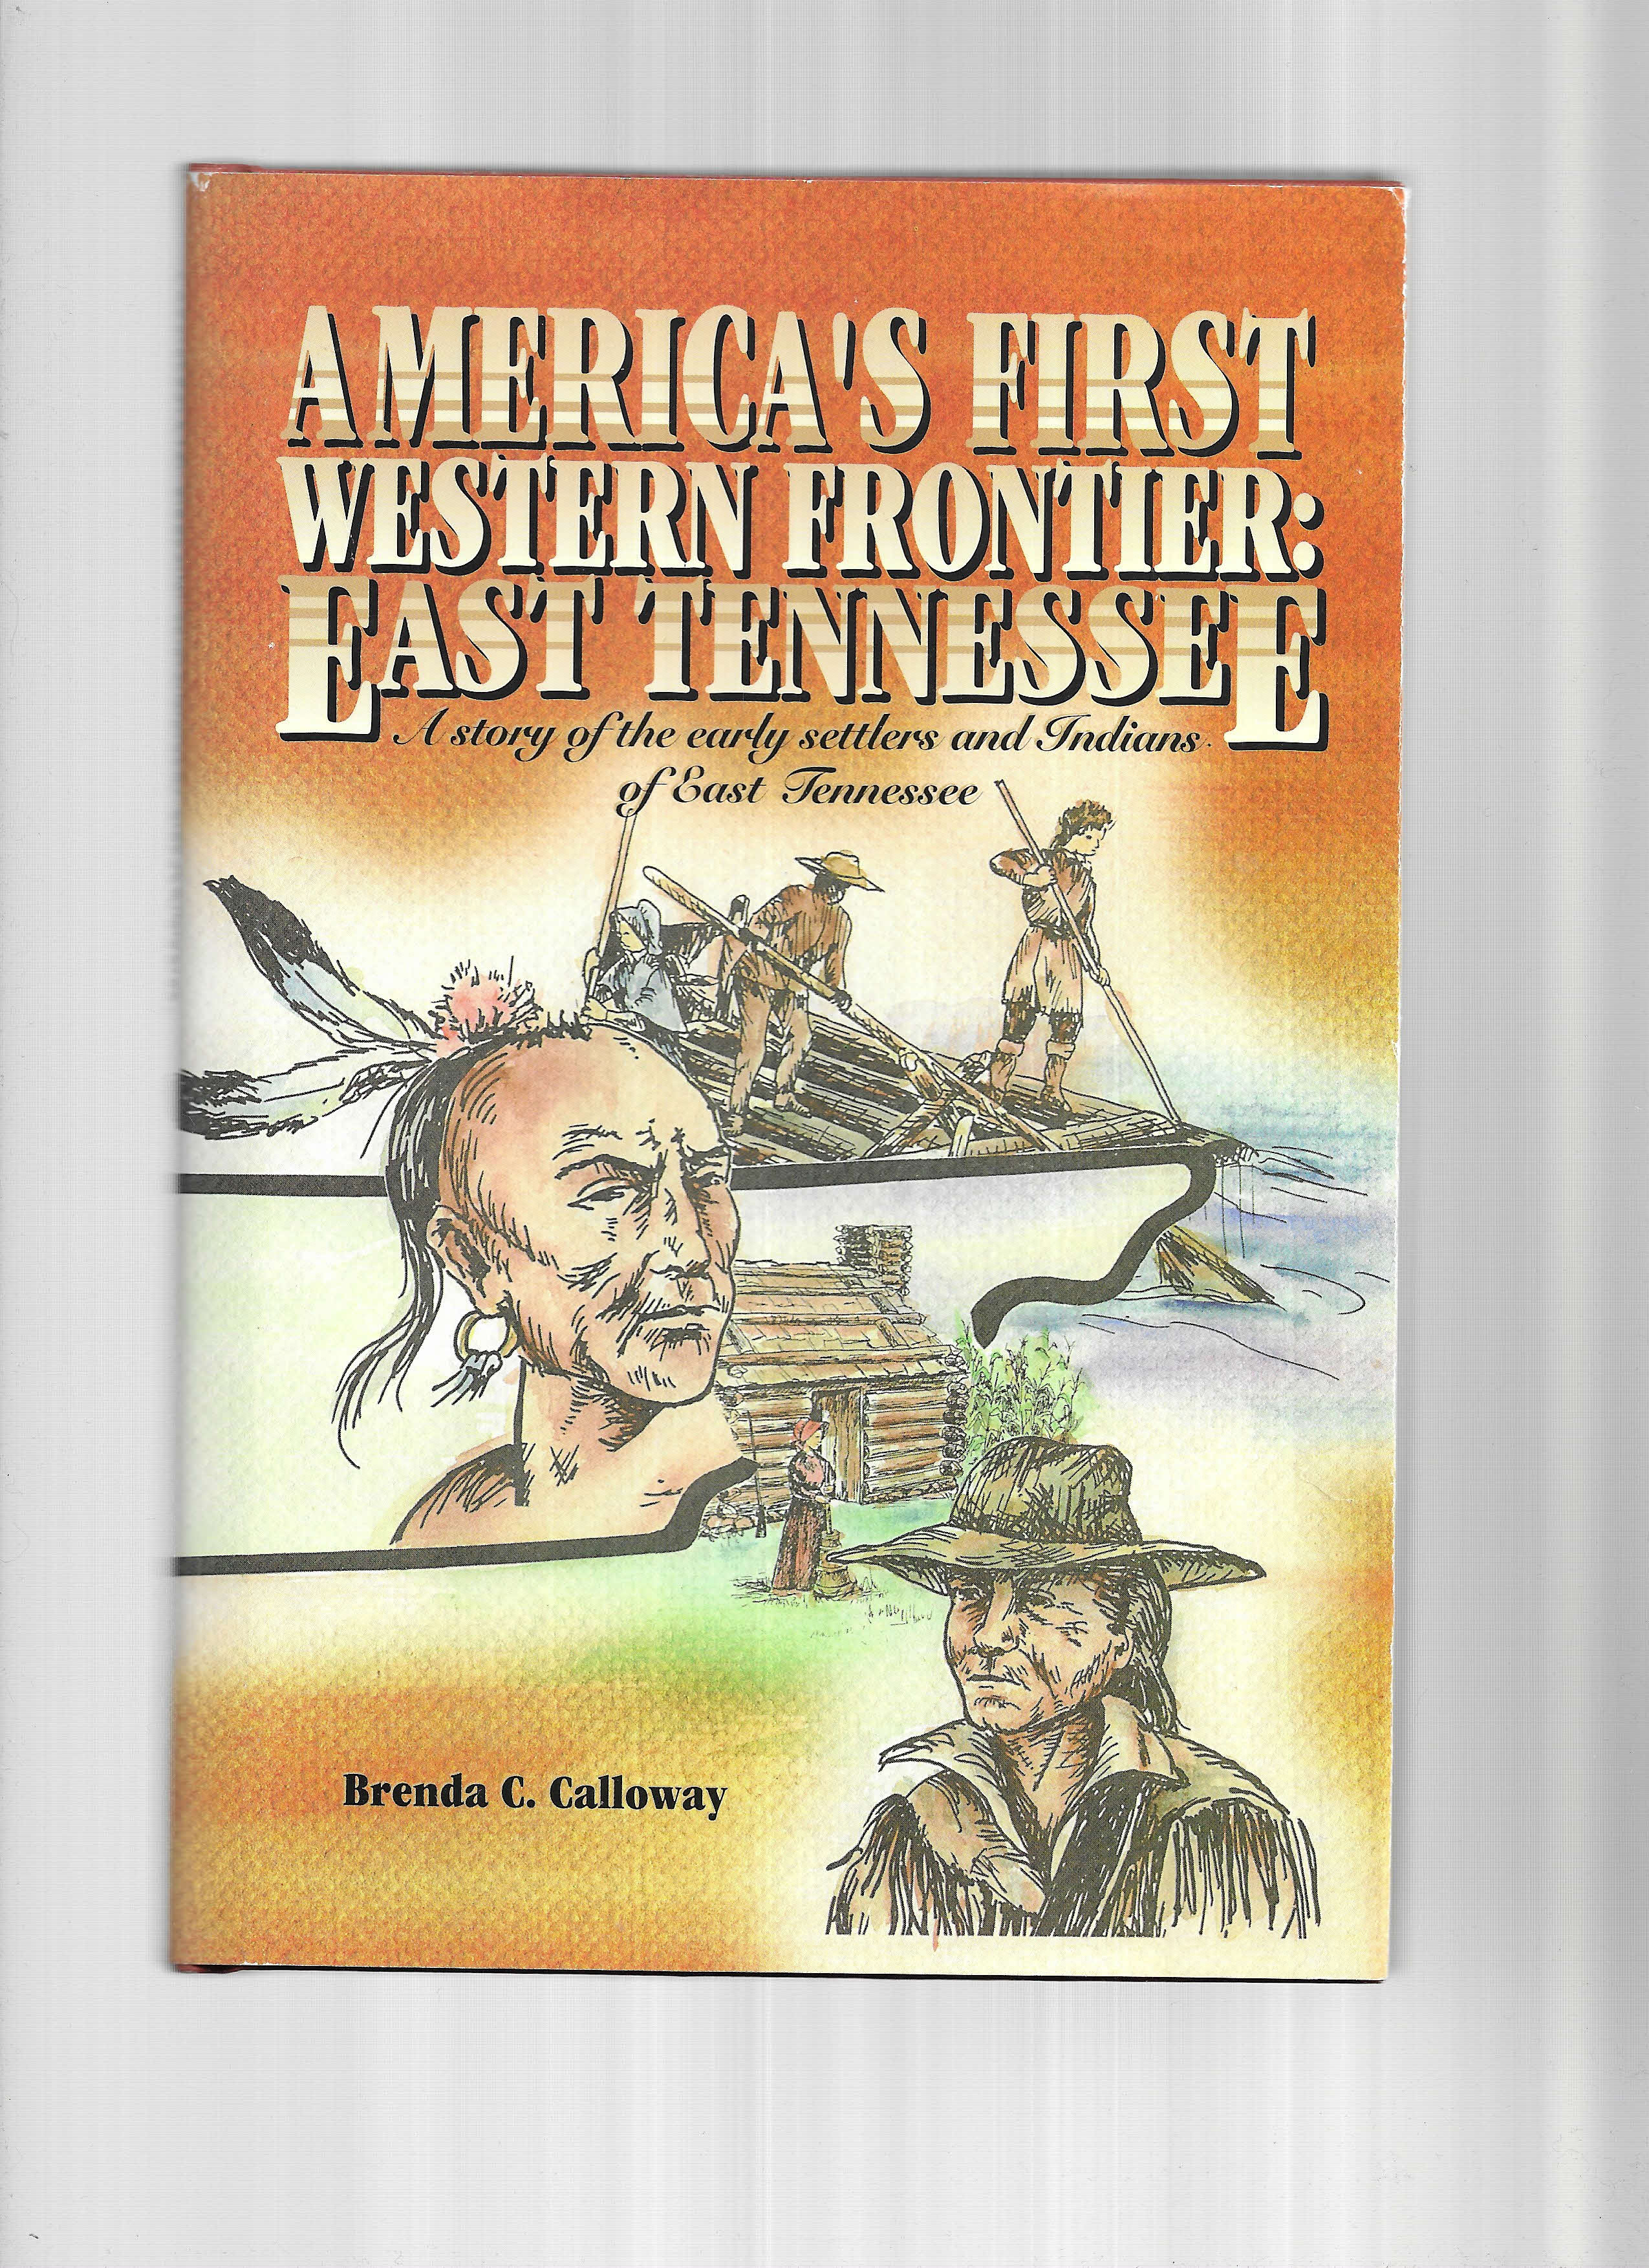 AMERICA'S FIRST WESTERN FRONTIER: EAST TENNESSEE. A Story Of The Early Settlers And Indians Of East Tennessee. Edited By Jay Robert Reese. Illustrated By Tamara Geisert - Calloway, Brenda C.